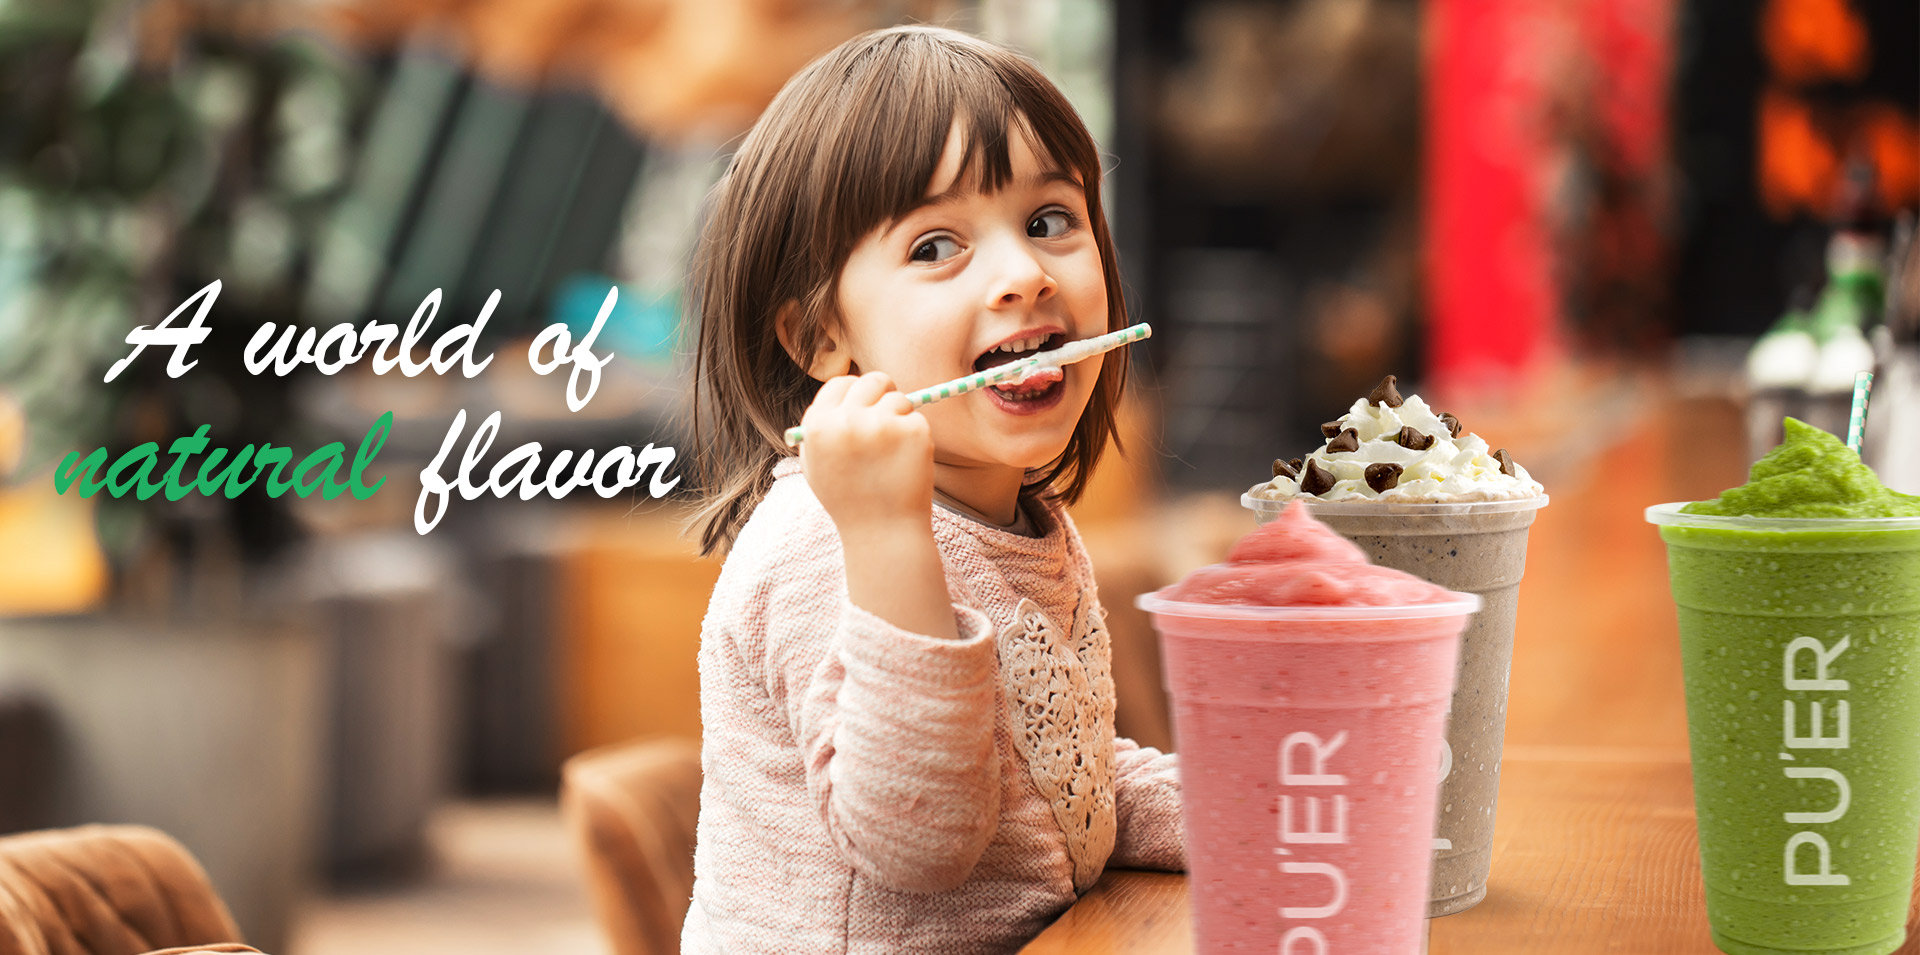 Kids-Friendly Delights: Fresh Fruit Smoothies at Pu’er Taiwan Tea & Coffee